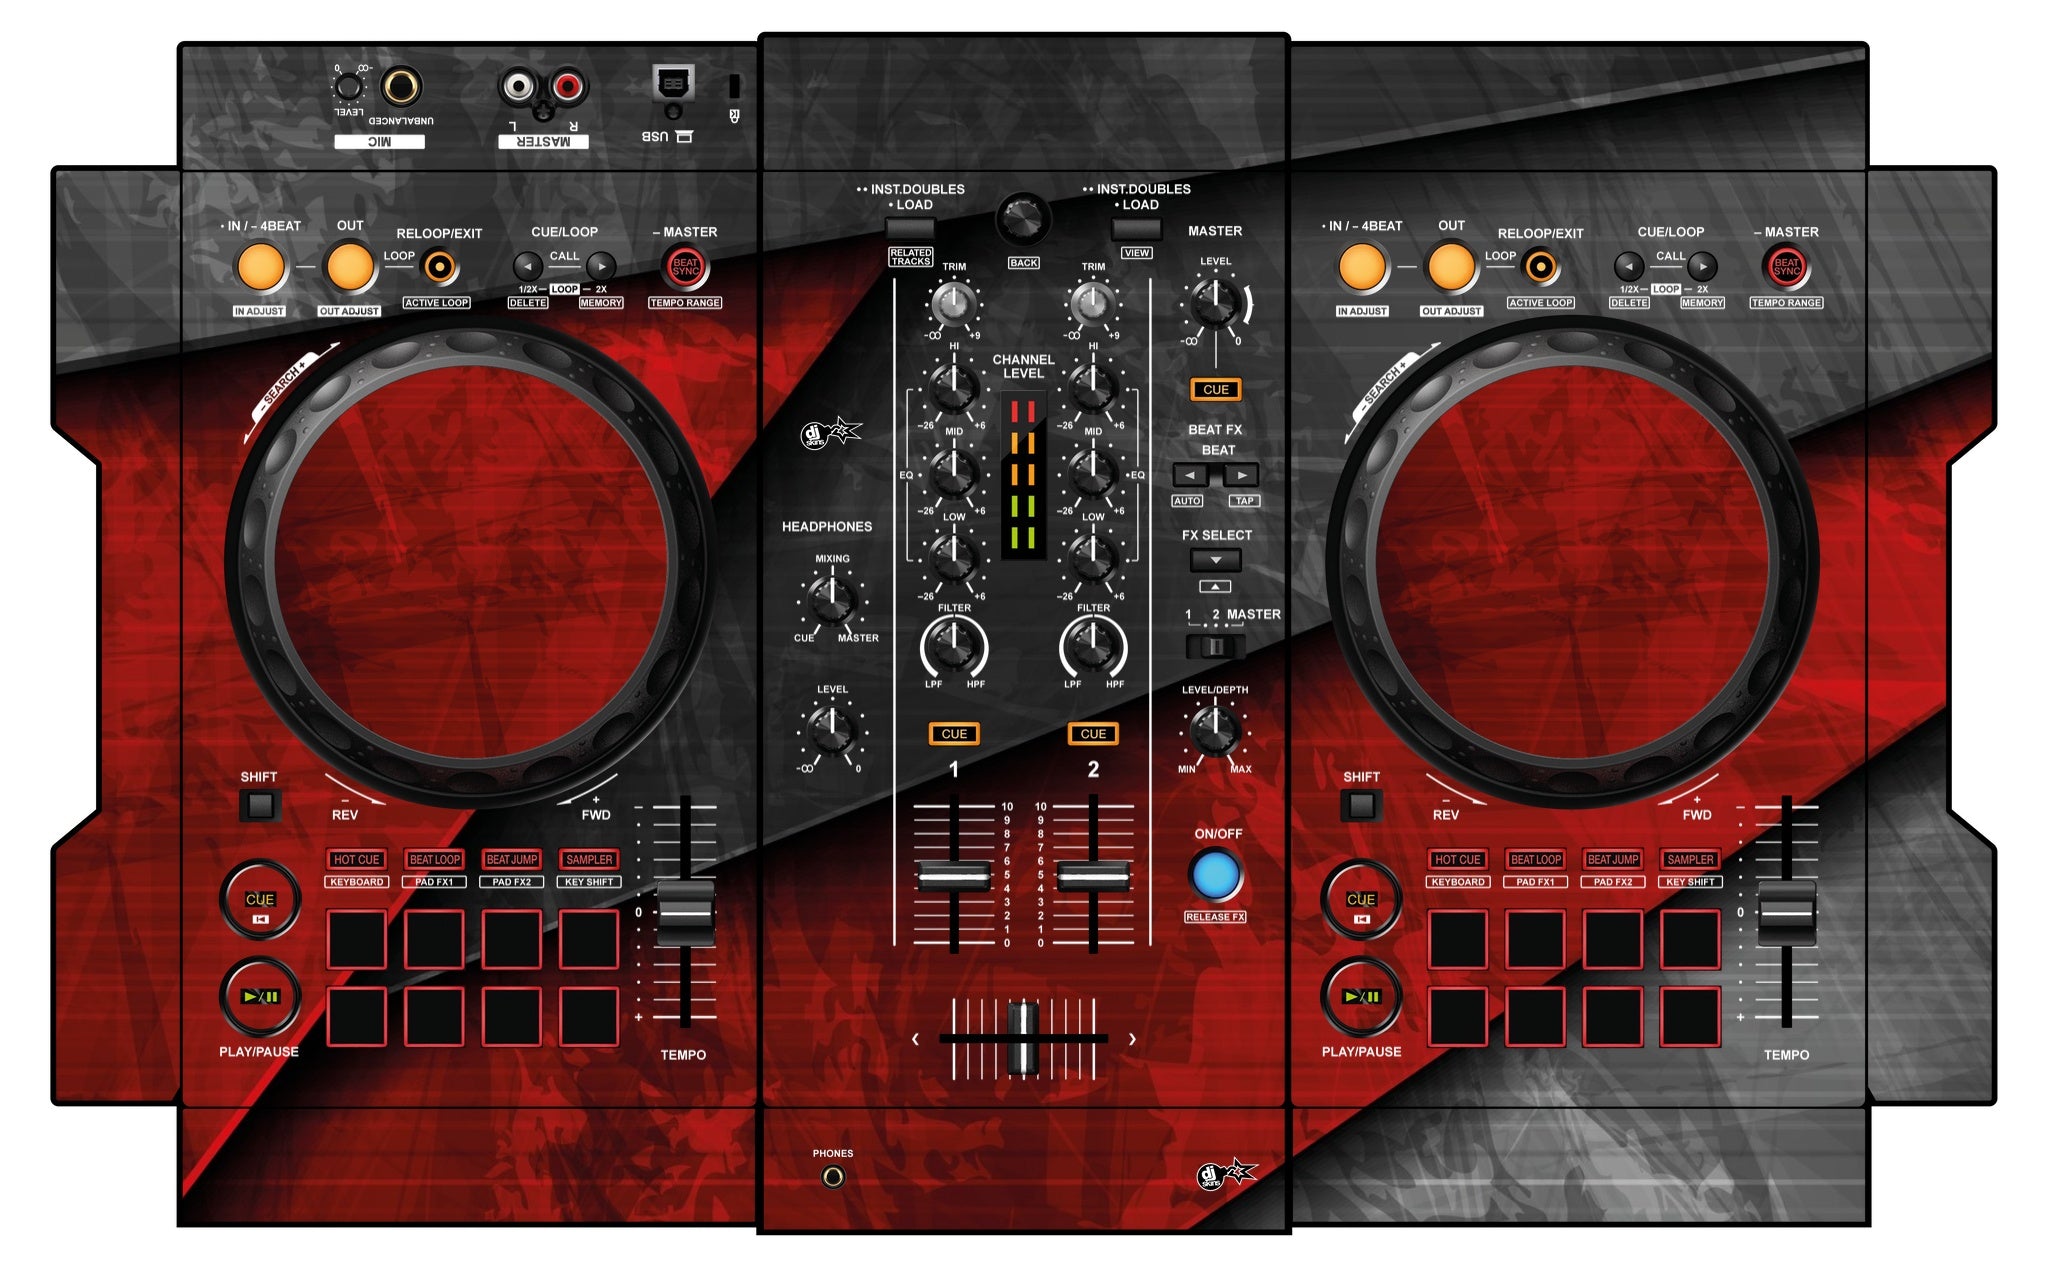 Pioneer DDJ-400 Controller at Rs 24900/piece, Sound Controller in Chennai